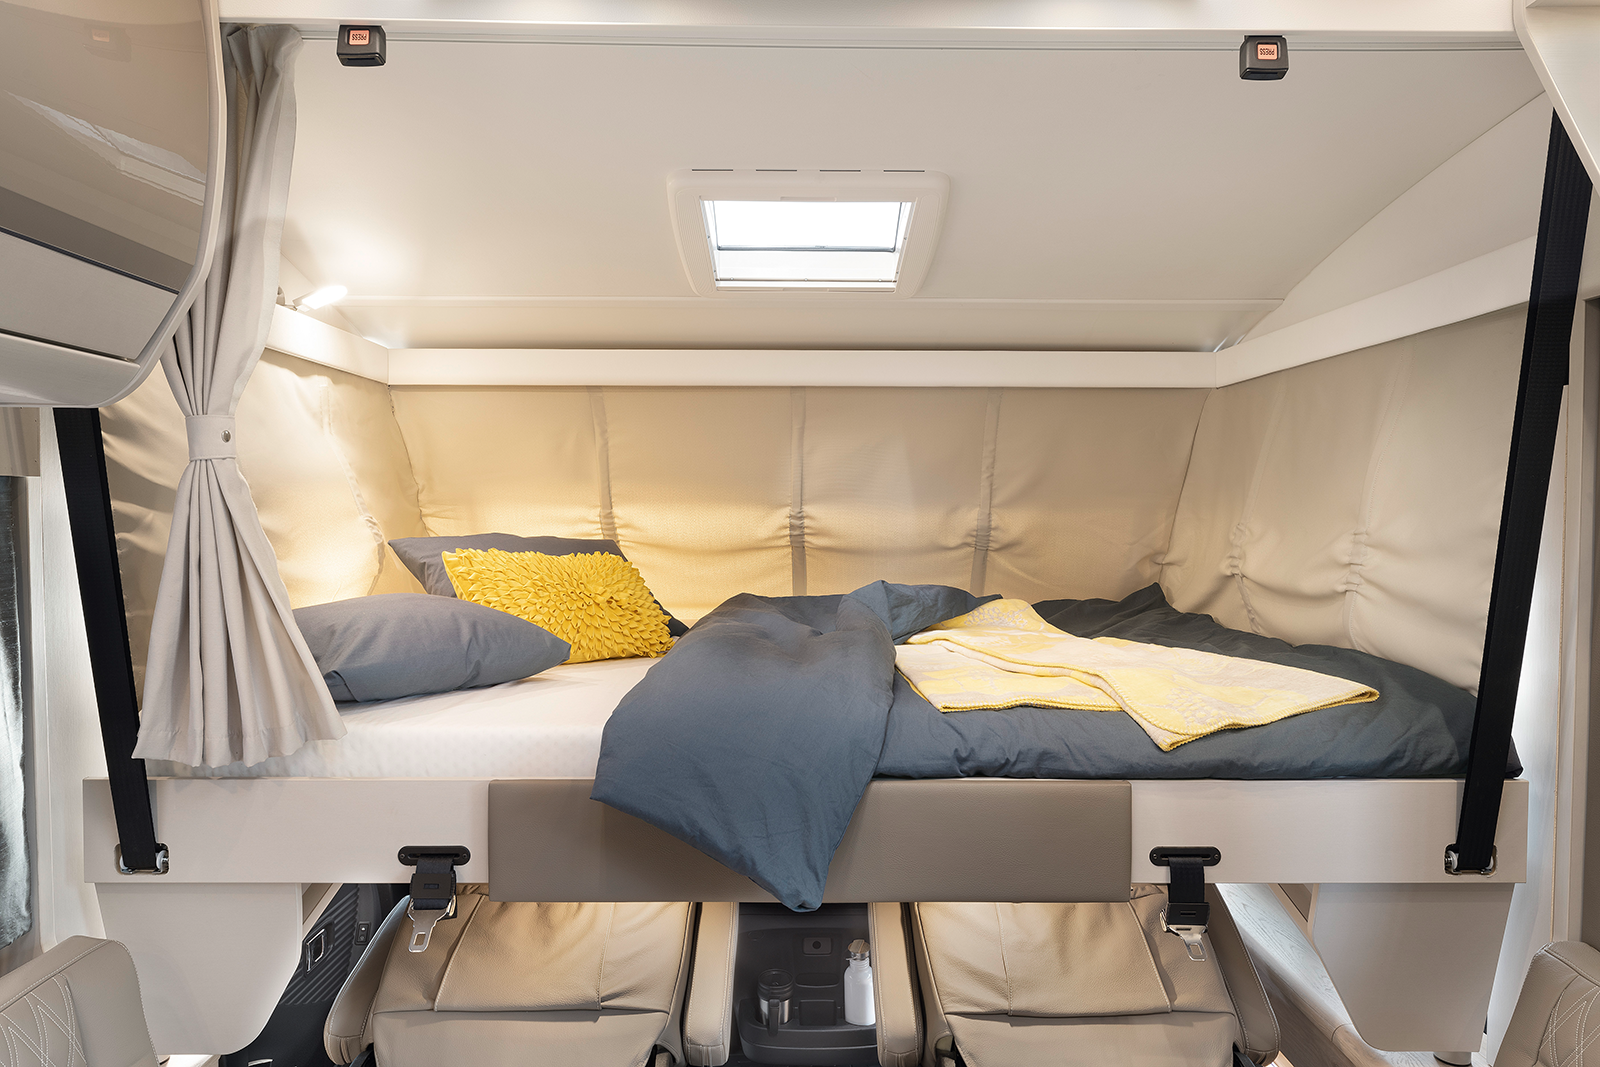 Maximum sleeping comfort: the pull-down beds in the A Class offer a large 200 x 150 cm sleeping area with electrical operation as standard